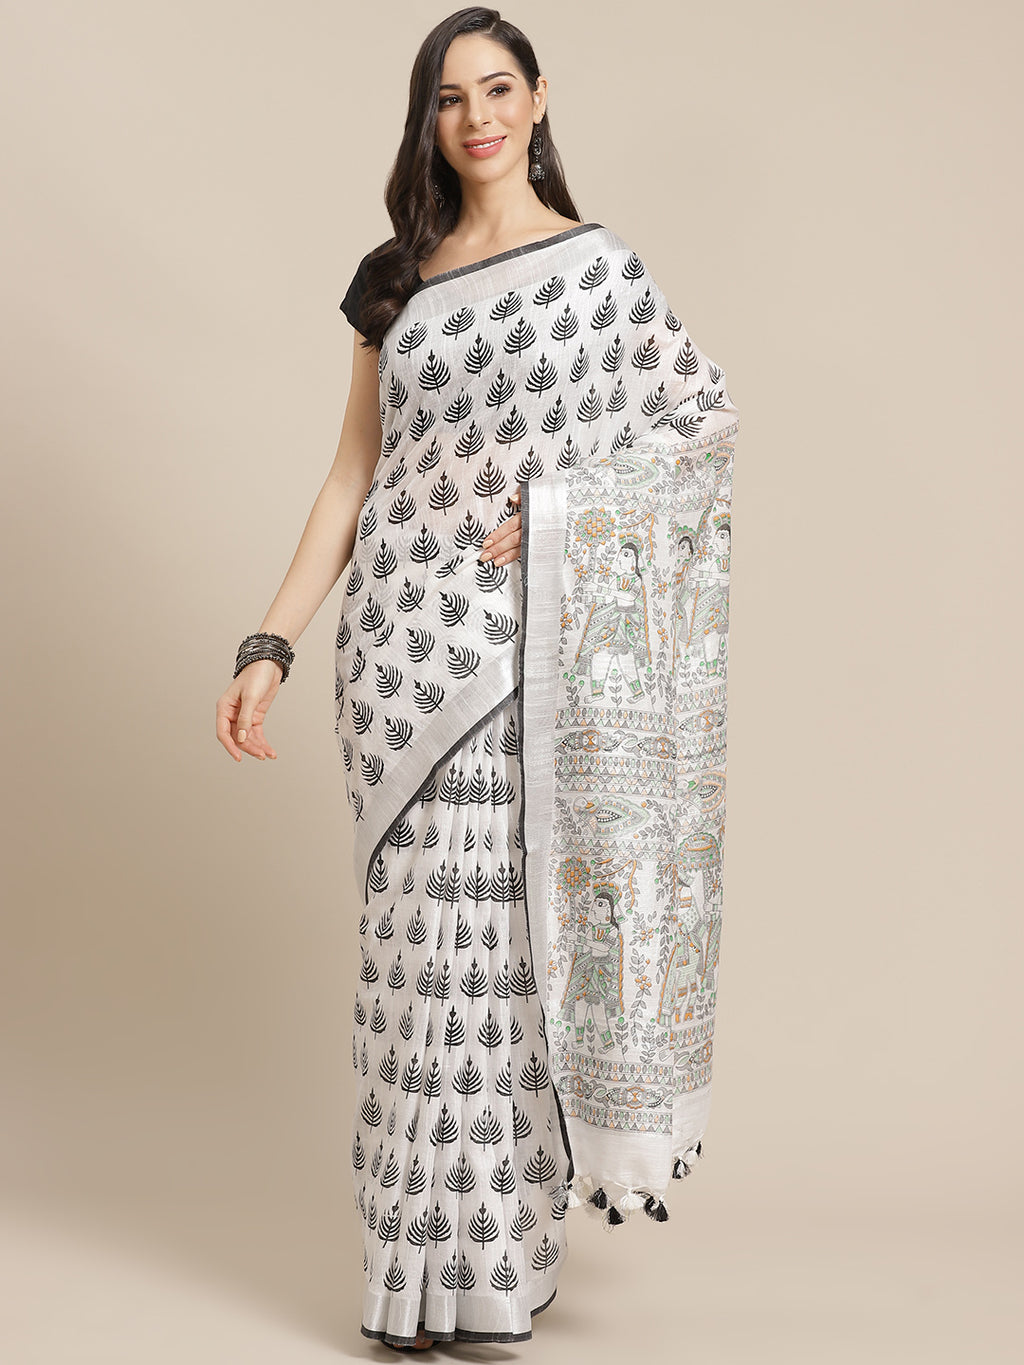 White and Green, Kalakari India Bhagalpuri Linen Blend Woven Design Saree with Blouse ALBGSA0147-Saree-Kalakari India-ALBGSA0147-Cotton, Geographical Indication, Hand Crafted, Heritage Prints, Linen, Natural Dyes, Red, Sarees, Shibori, Sustainable Fabrics, Woven, Yellow-[Linen,Ethnic,wear,Fashionista,Handloom,Handicraft,Indigo,blockprint,block,print,Cotton,Chanderi,Blue, latest,classy,party,bollywood,trendy,summer,style,traditional,formal,elegant,unique,style,hand,block,print, dabu,booti,gift,pr